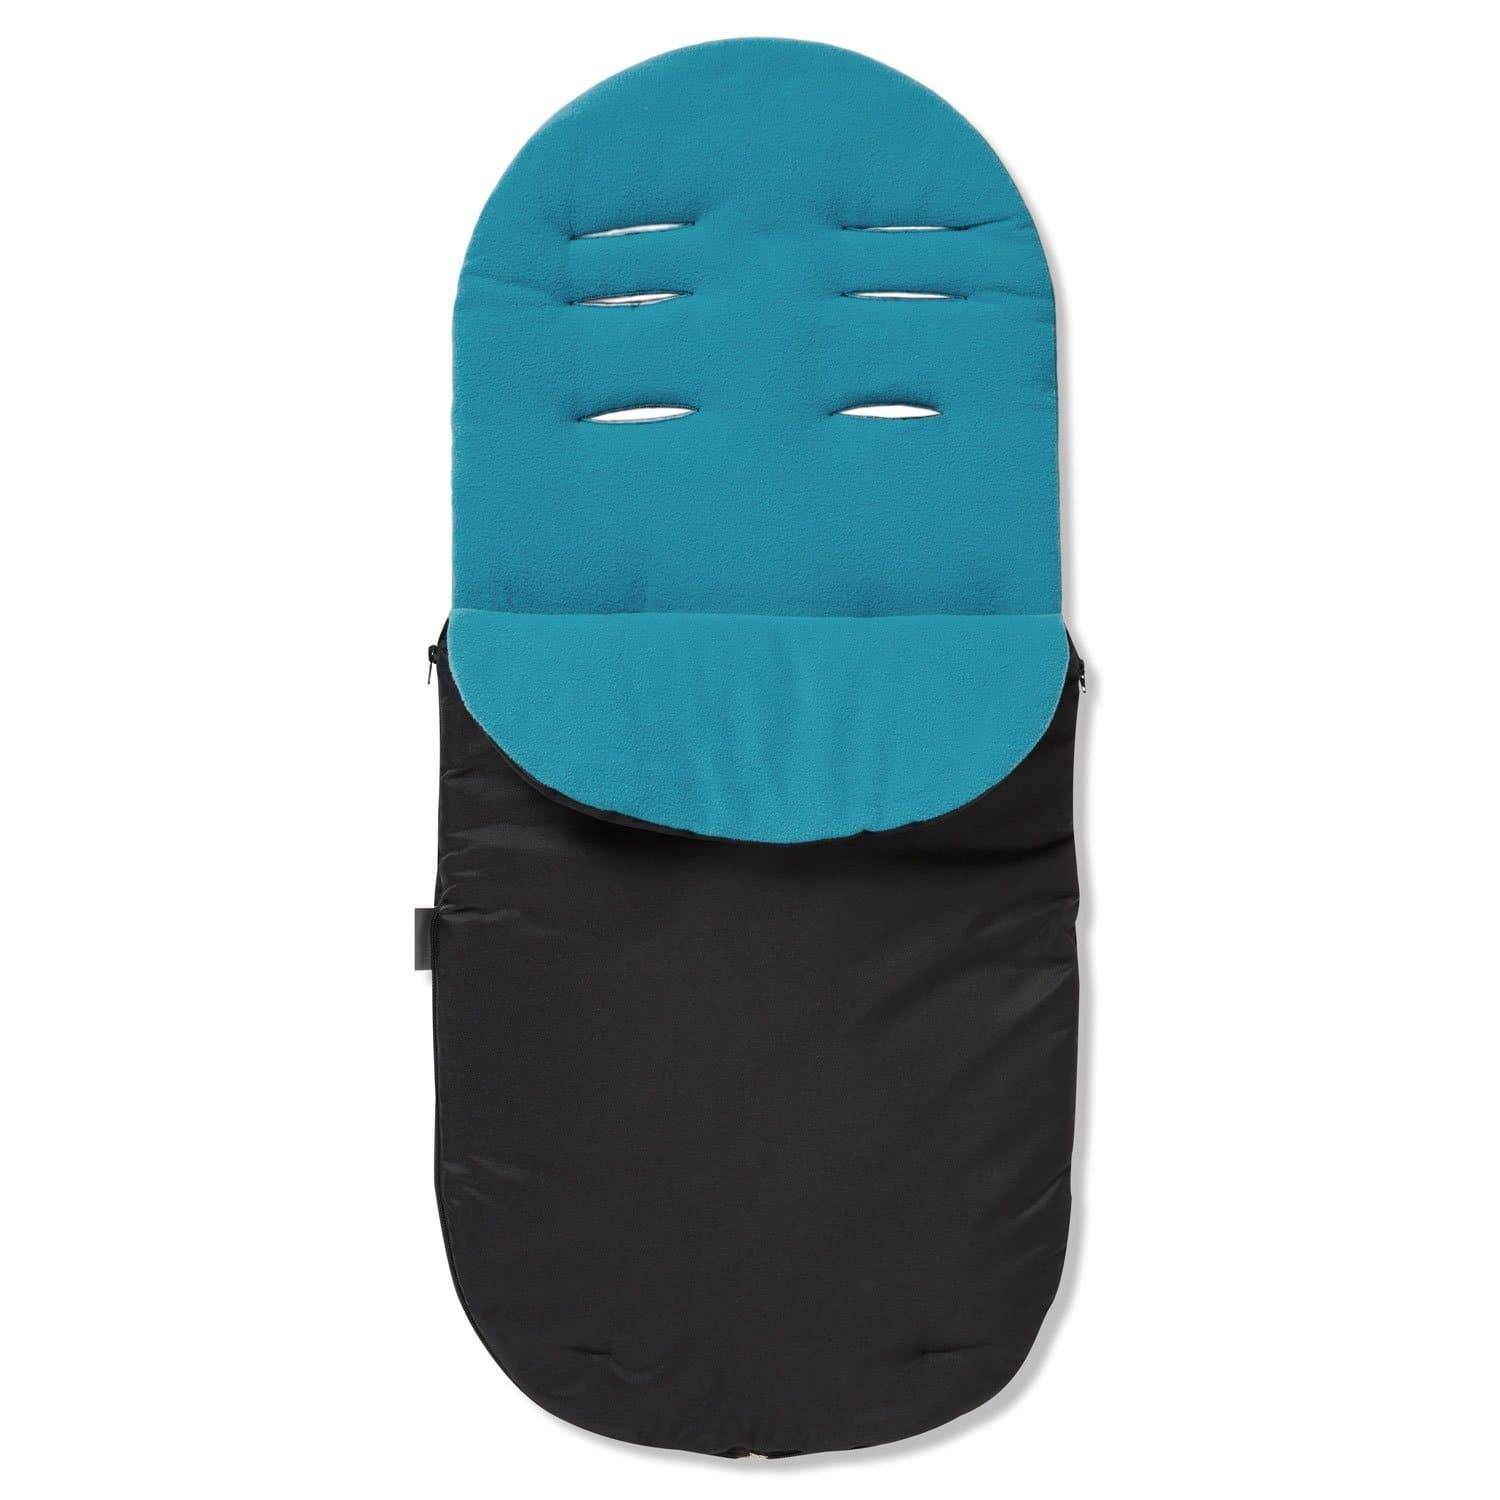 Footmuff / Cosy Toes Compatible with Babybus - Turquoise / Fits All Models | For Your Little One